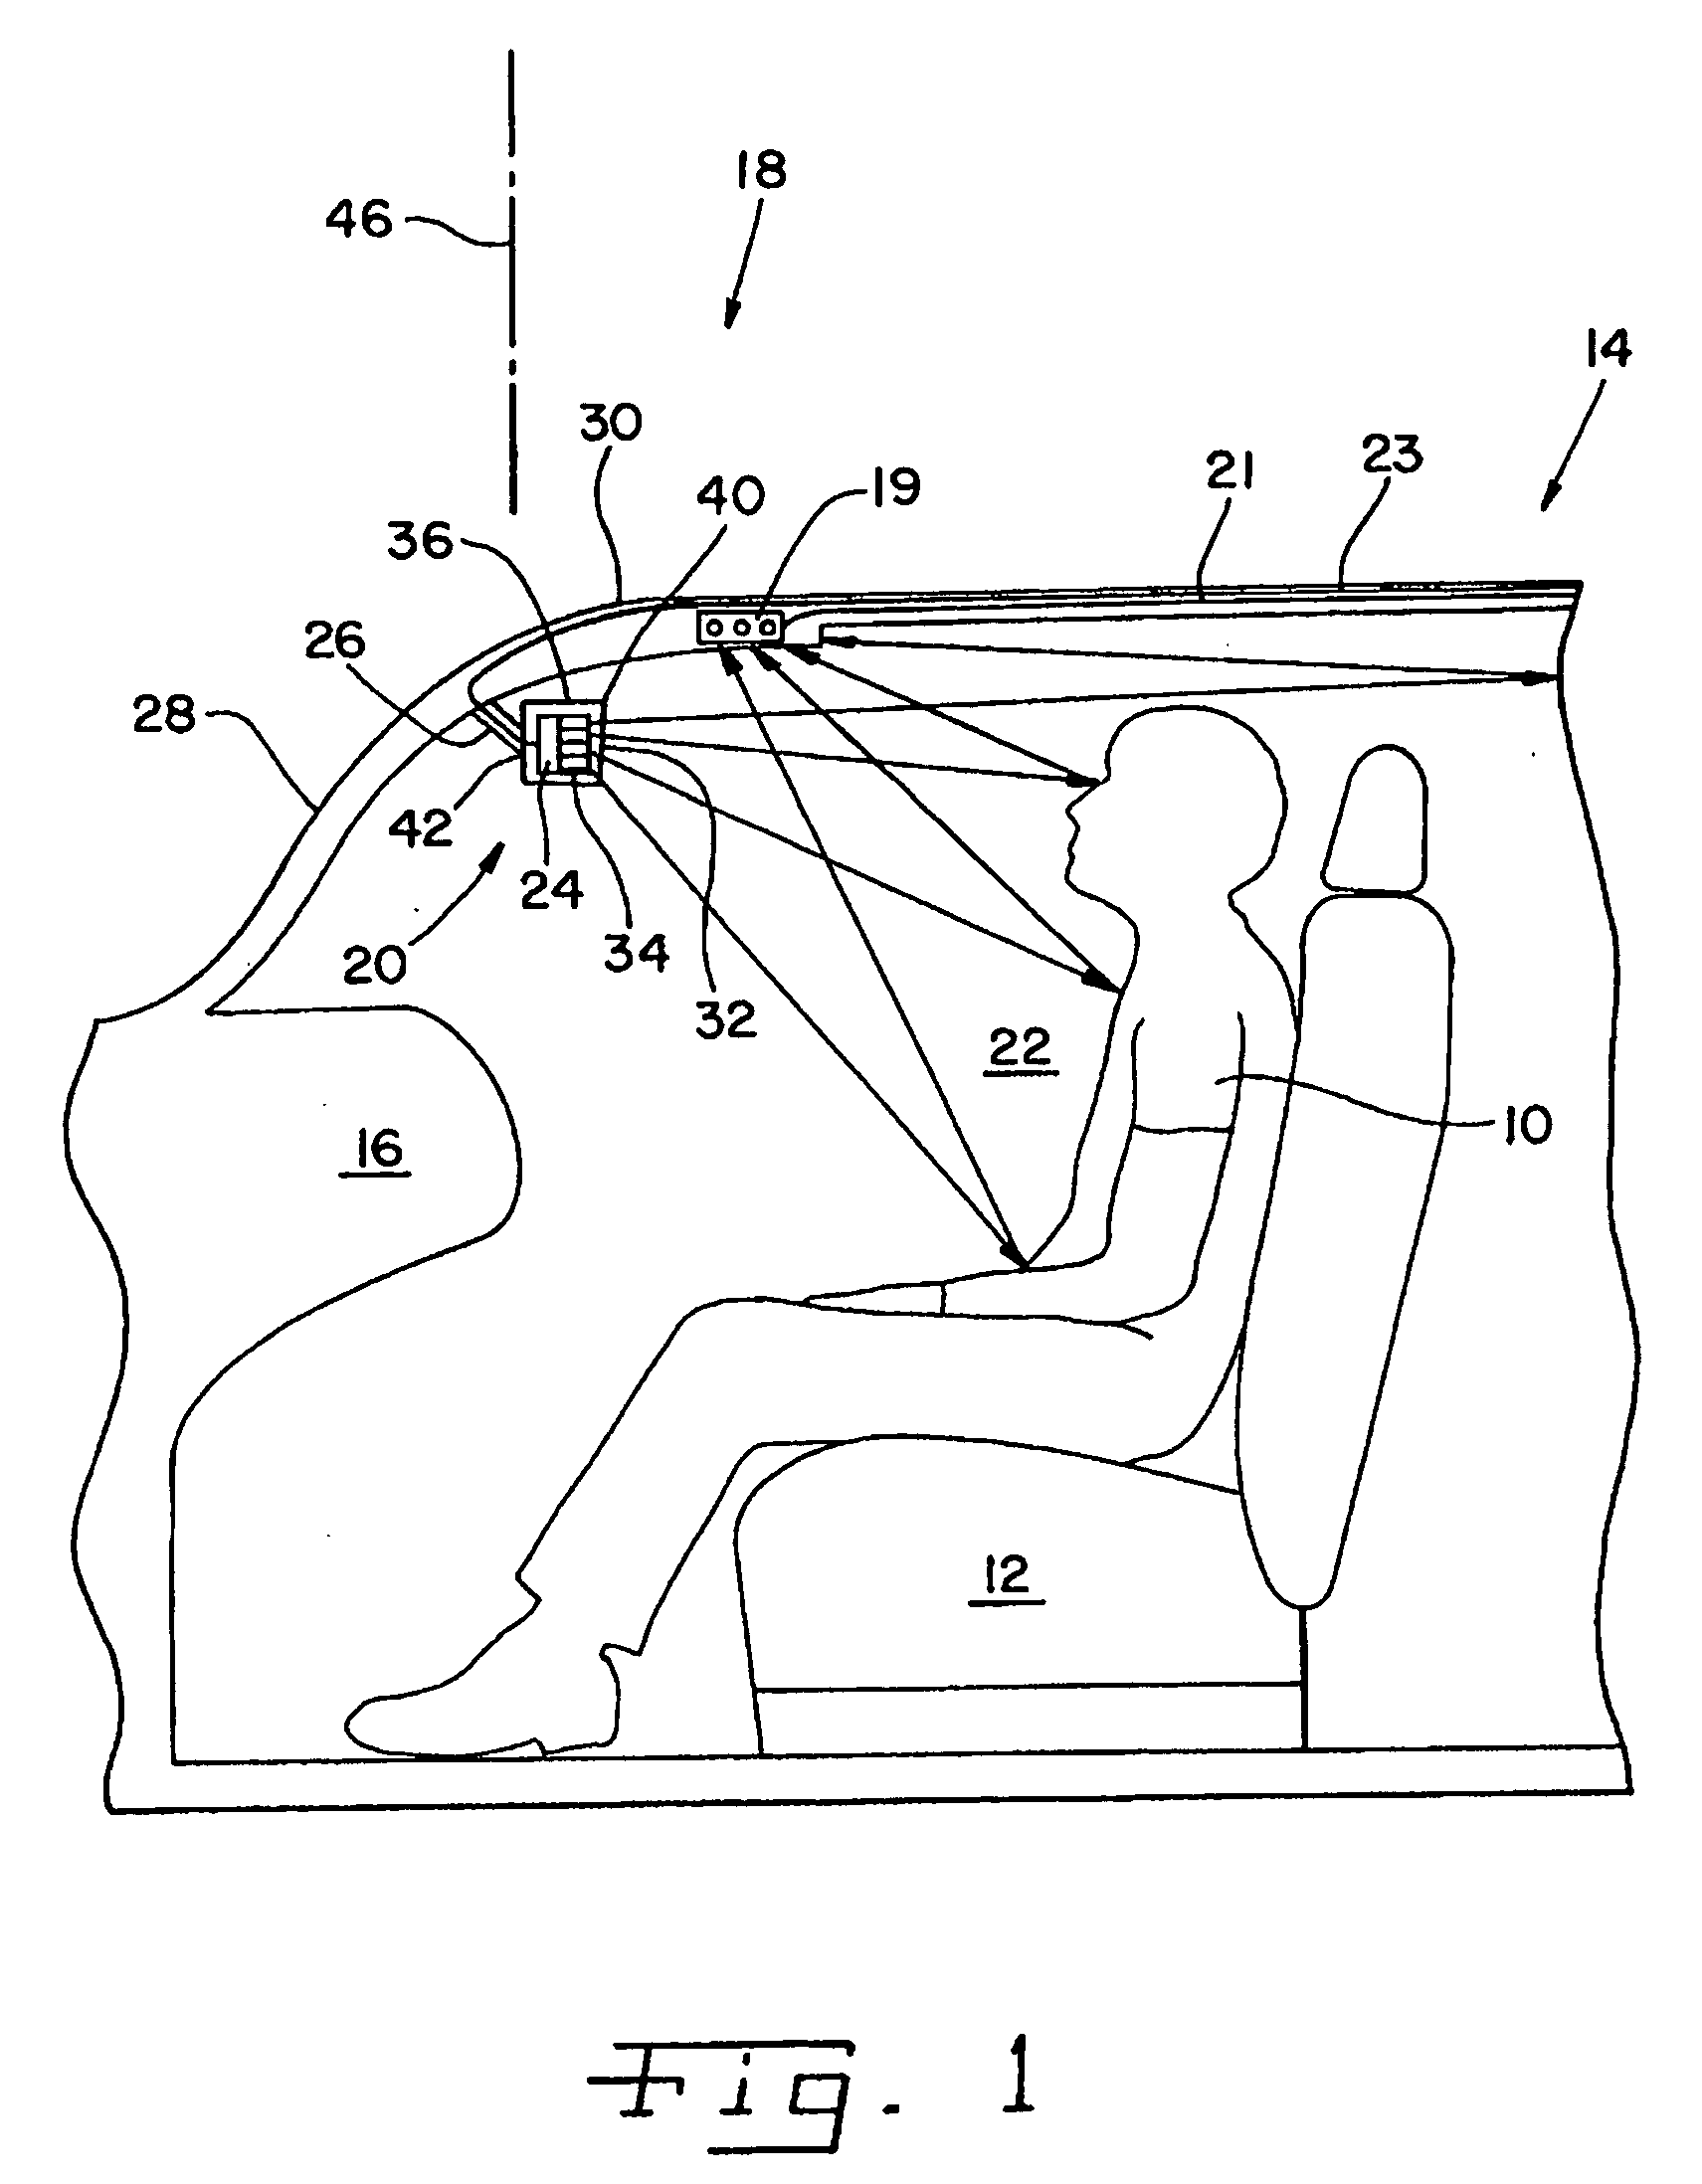 Illumination apparatus for an optical occupant monitoring system in a vehicle